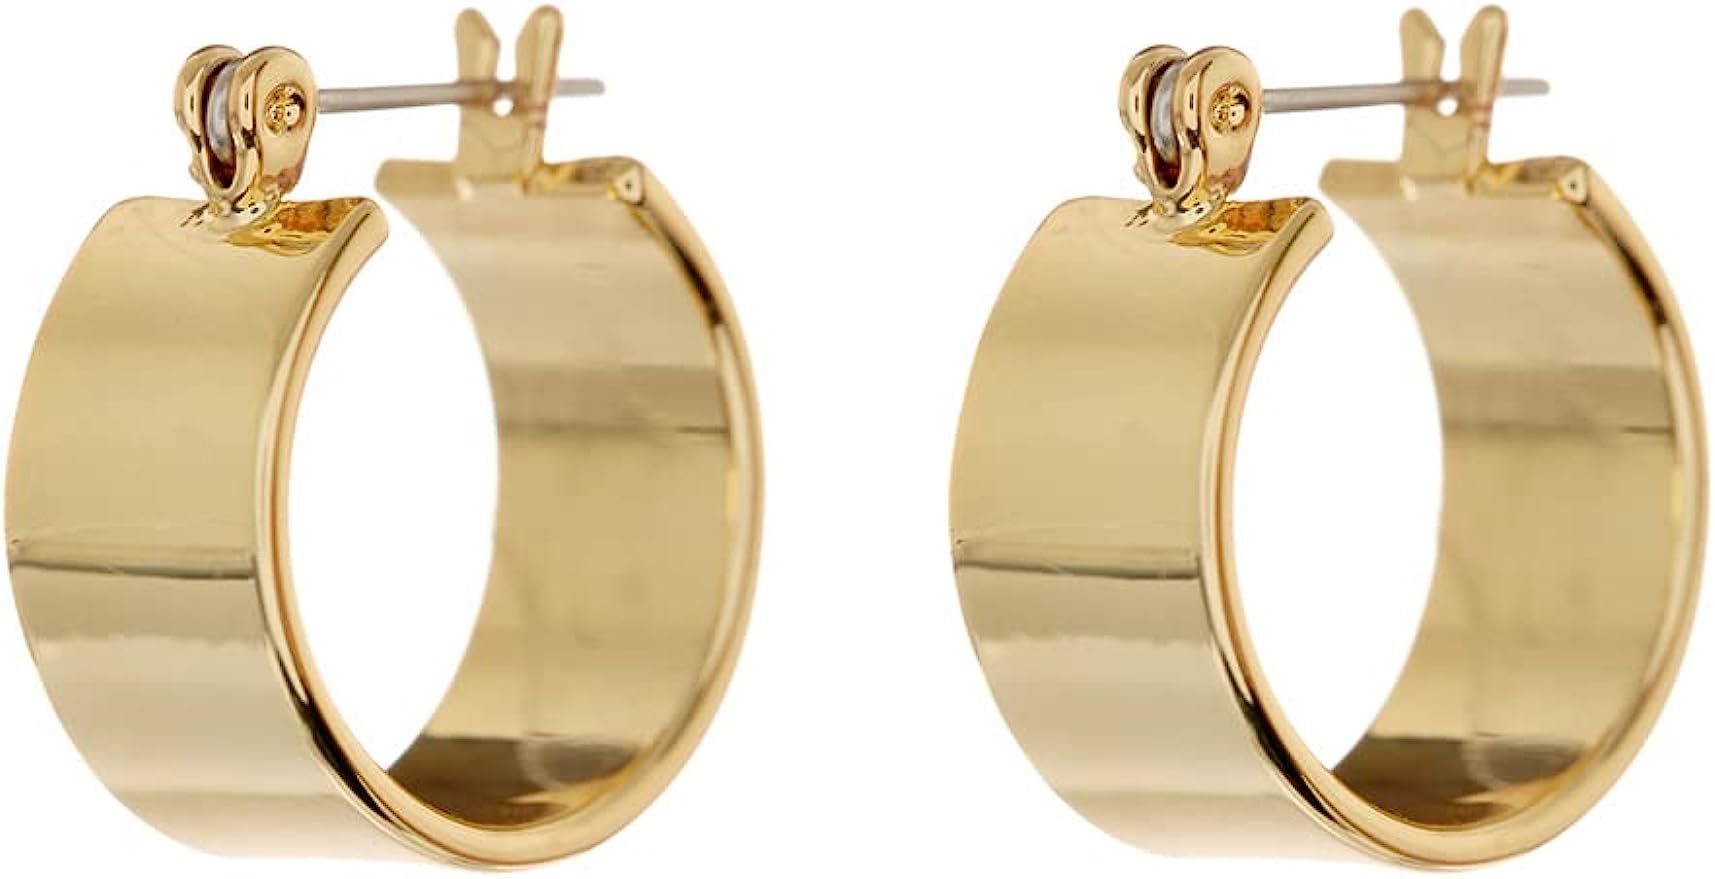 Luv Aj Positano Flat Wide Hoop Earrings in Polished 14k Antique Gold Plated | Amazon (US)